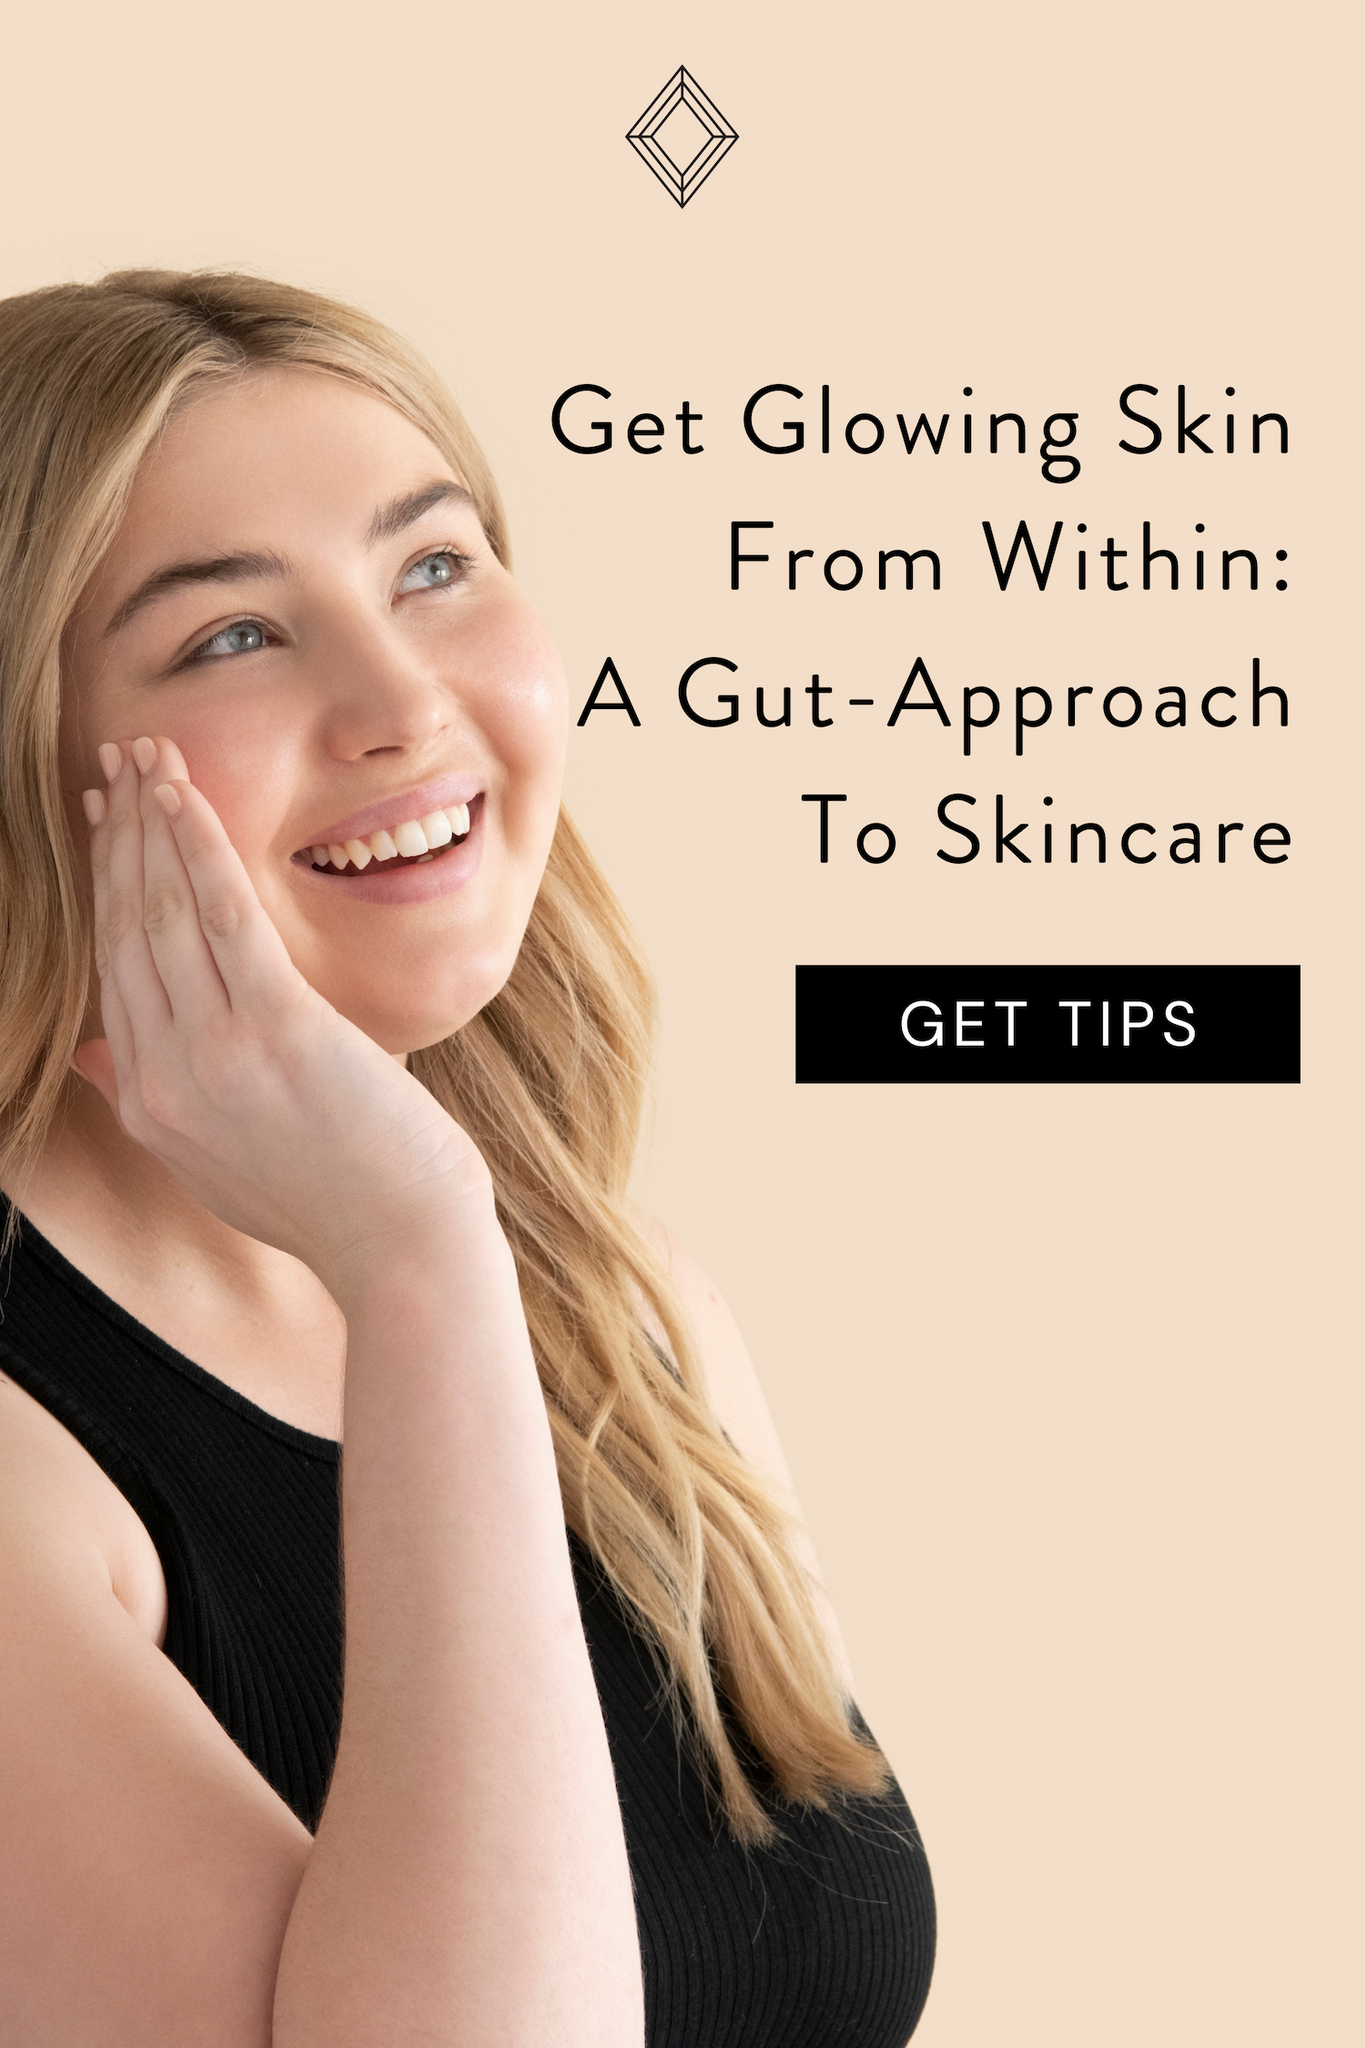 Get Glowing Skin From Within: A Gut-Approach To Skincare | Primally Pure Skincare